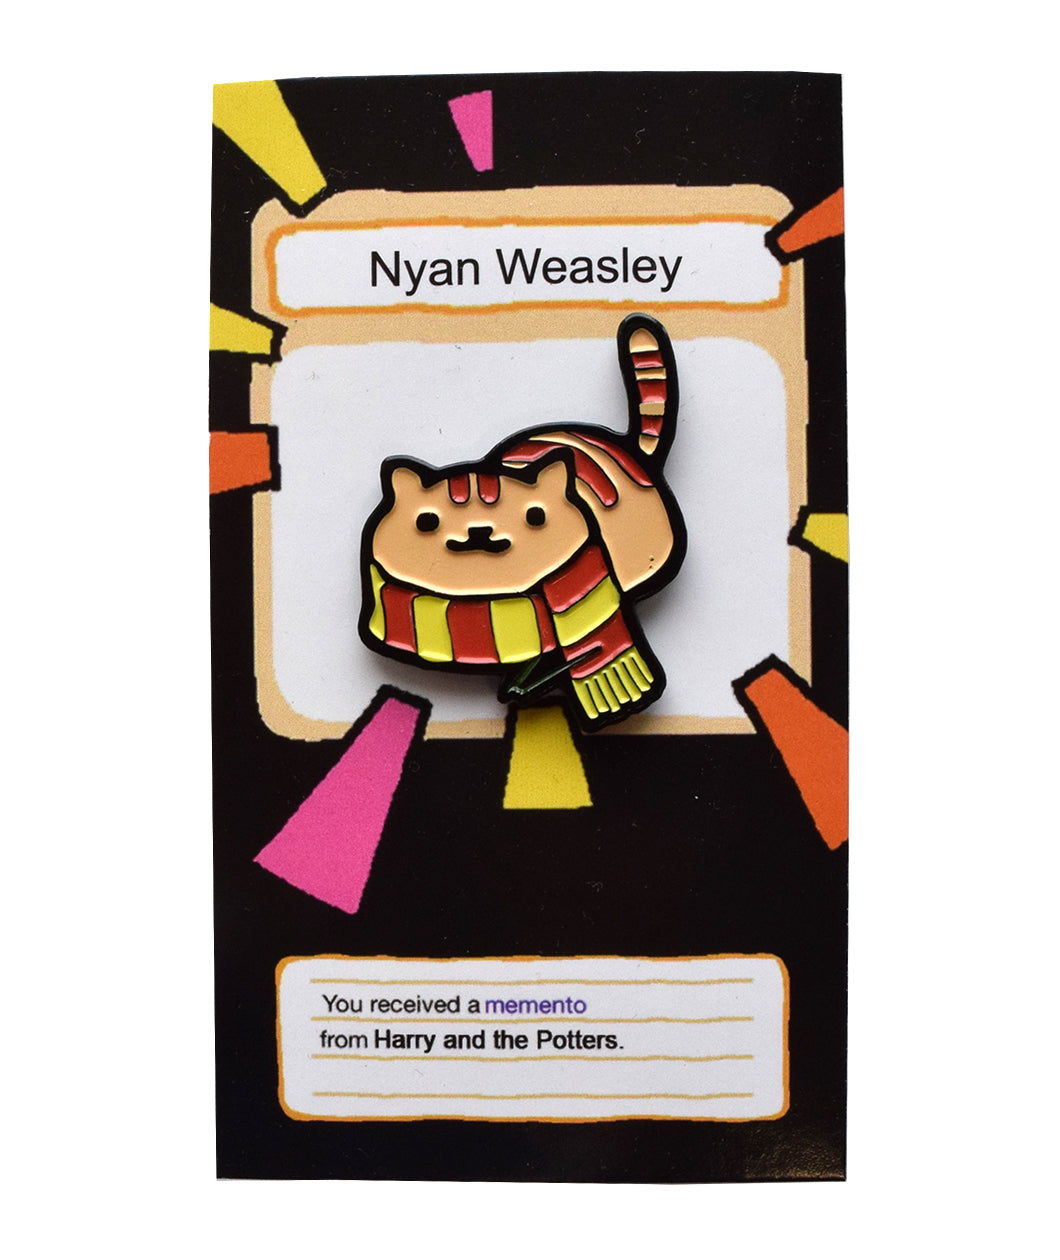 A pin shaped like cat that is orange with red stripes. It has a knitted scarf around its neck. The pink backing reads "Nyan Weasley" and "You received a memento from Harry and the Potters". 